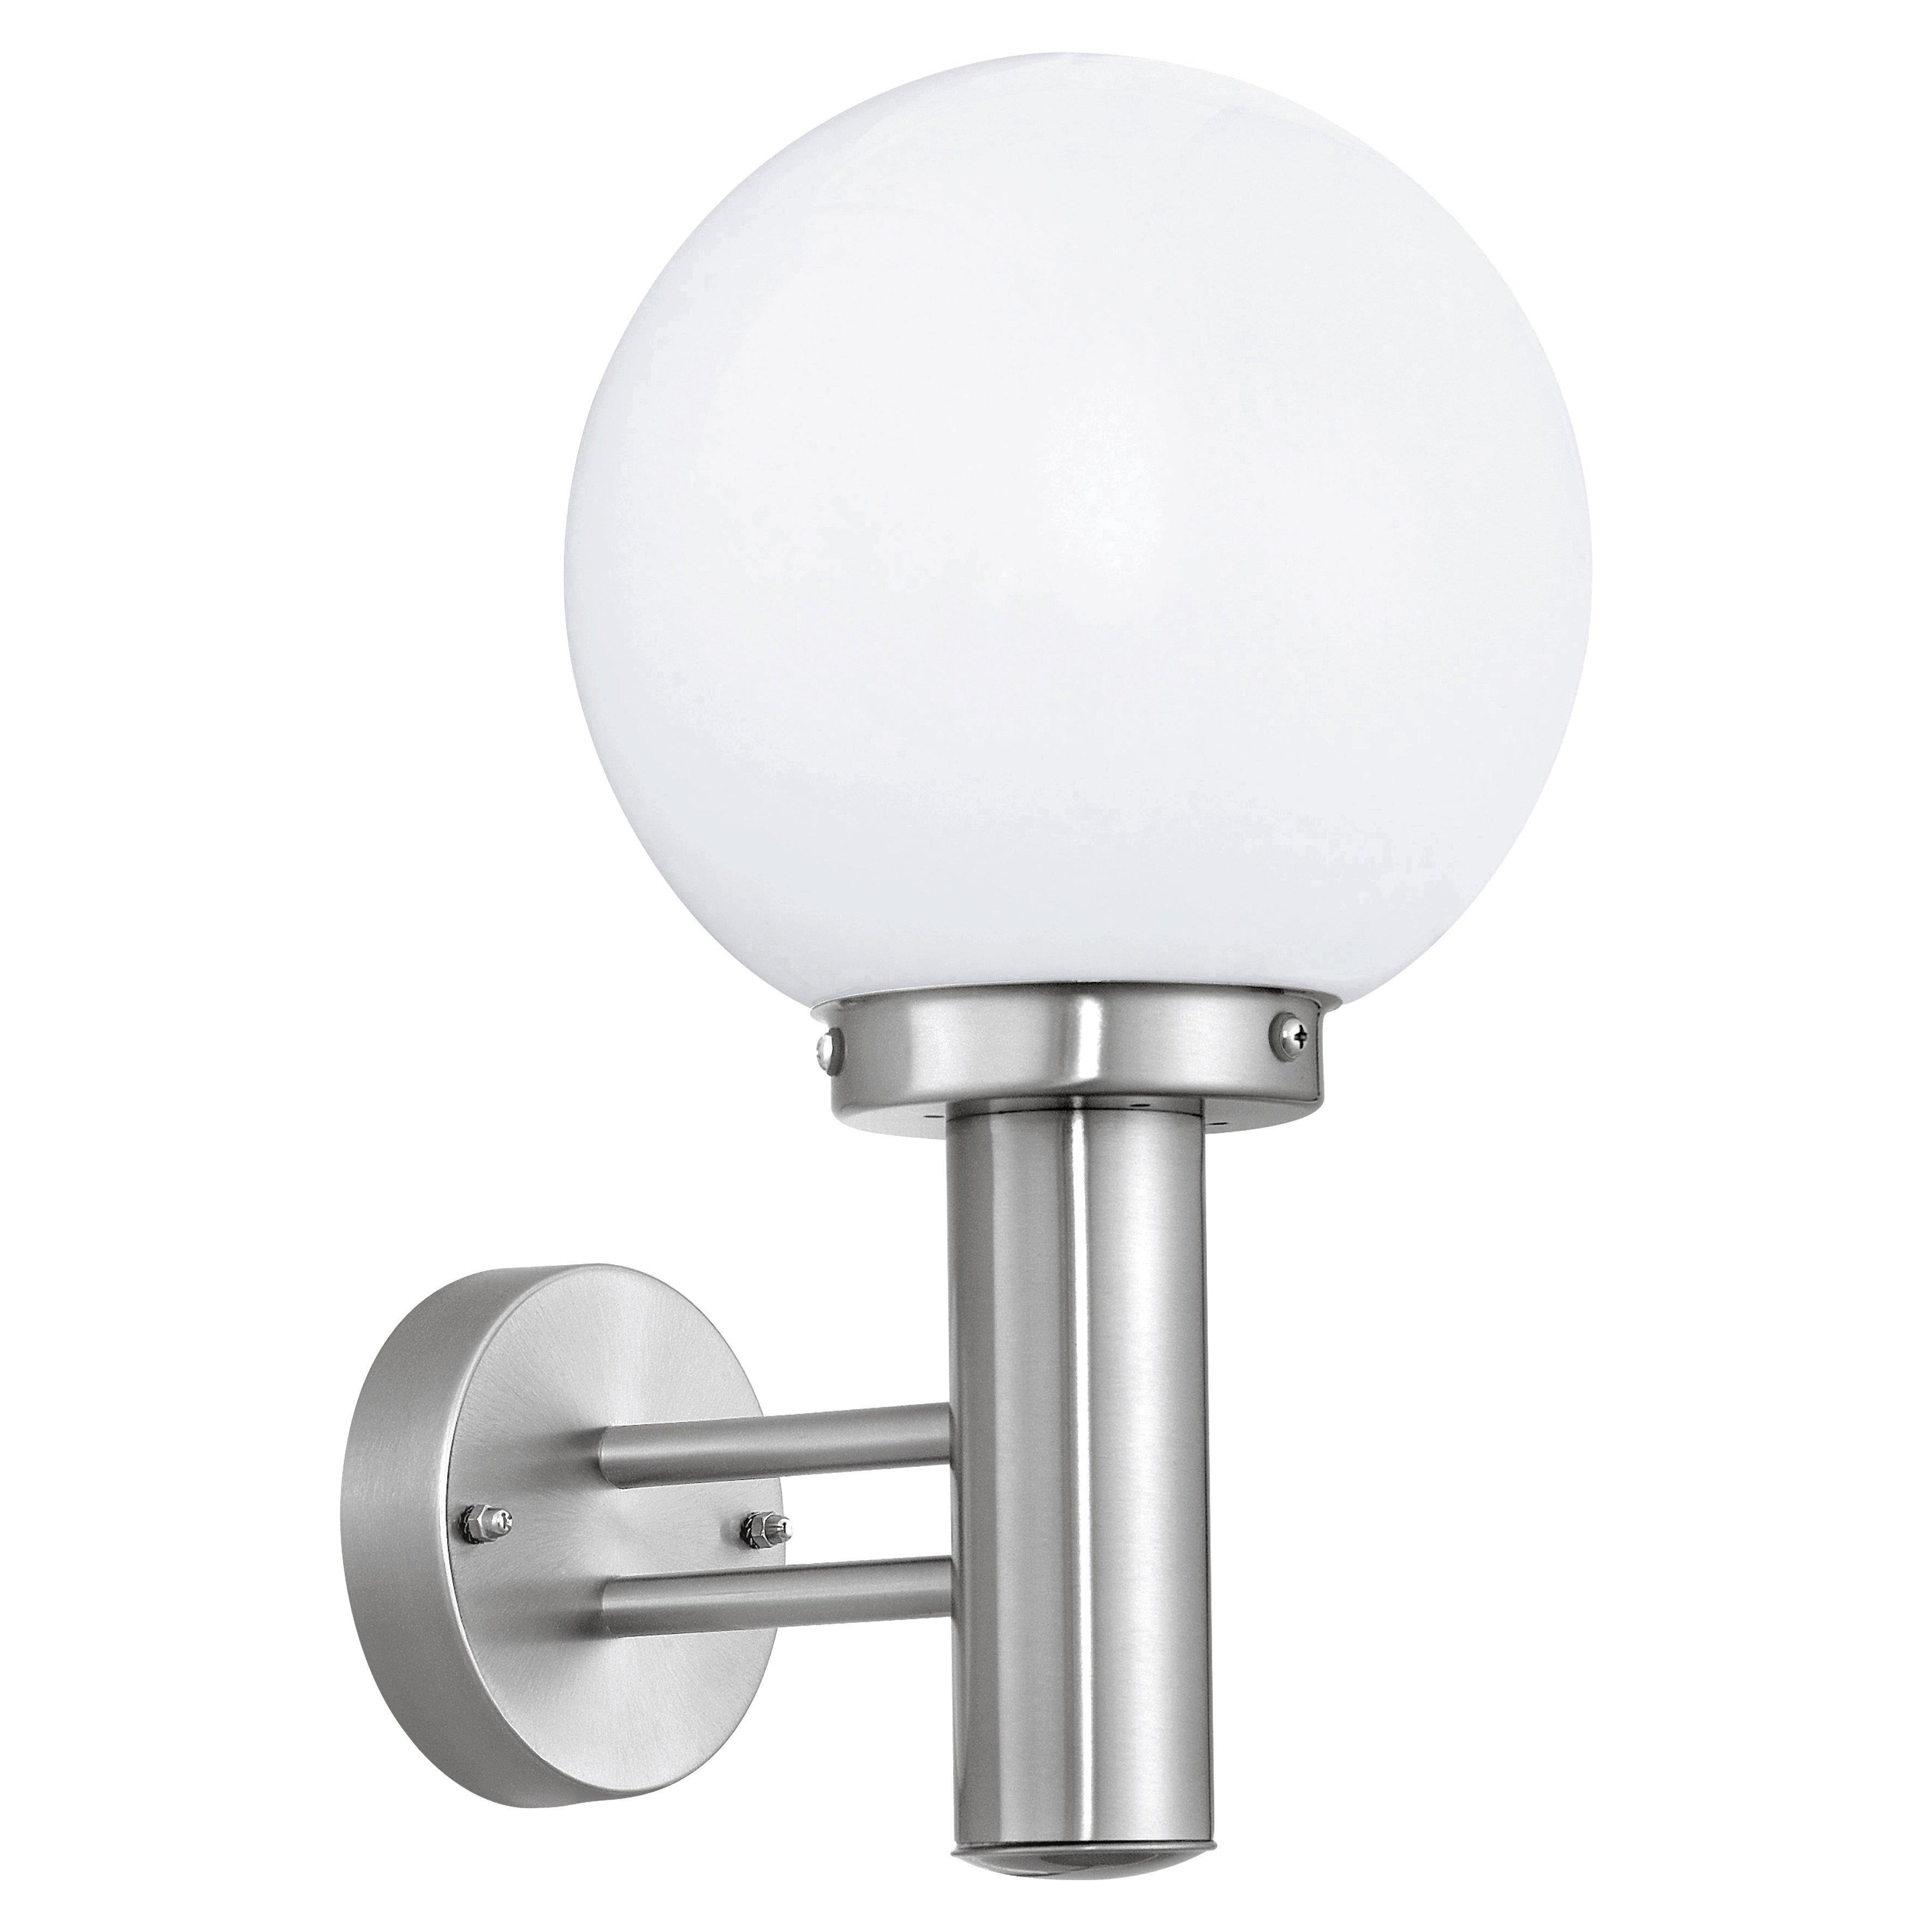 IP44 Outdoor Wall Light Stainless Steel Orb Shade 1x 60W E27 Bulb Porch Lamp - image 1